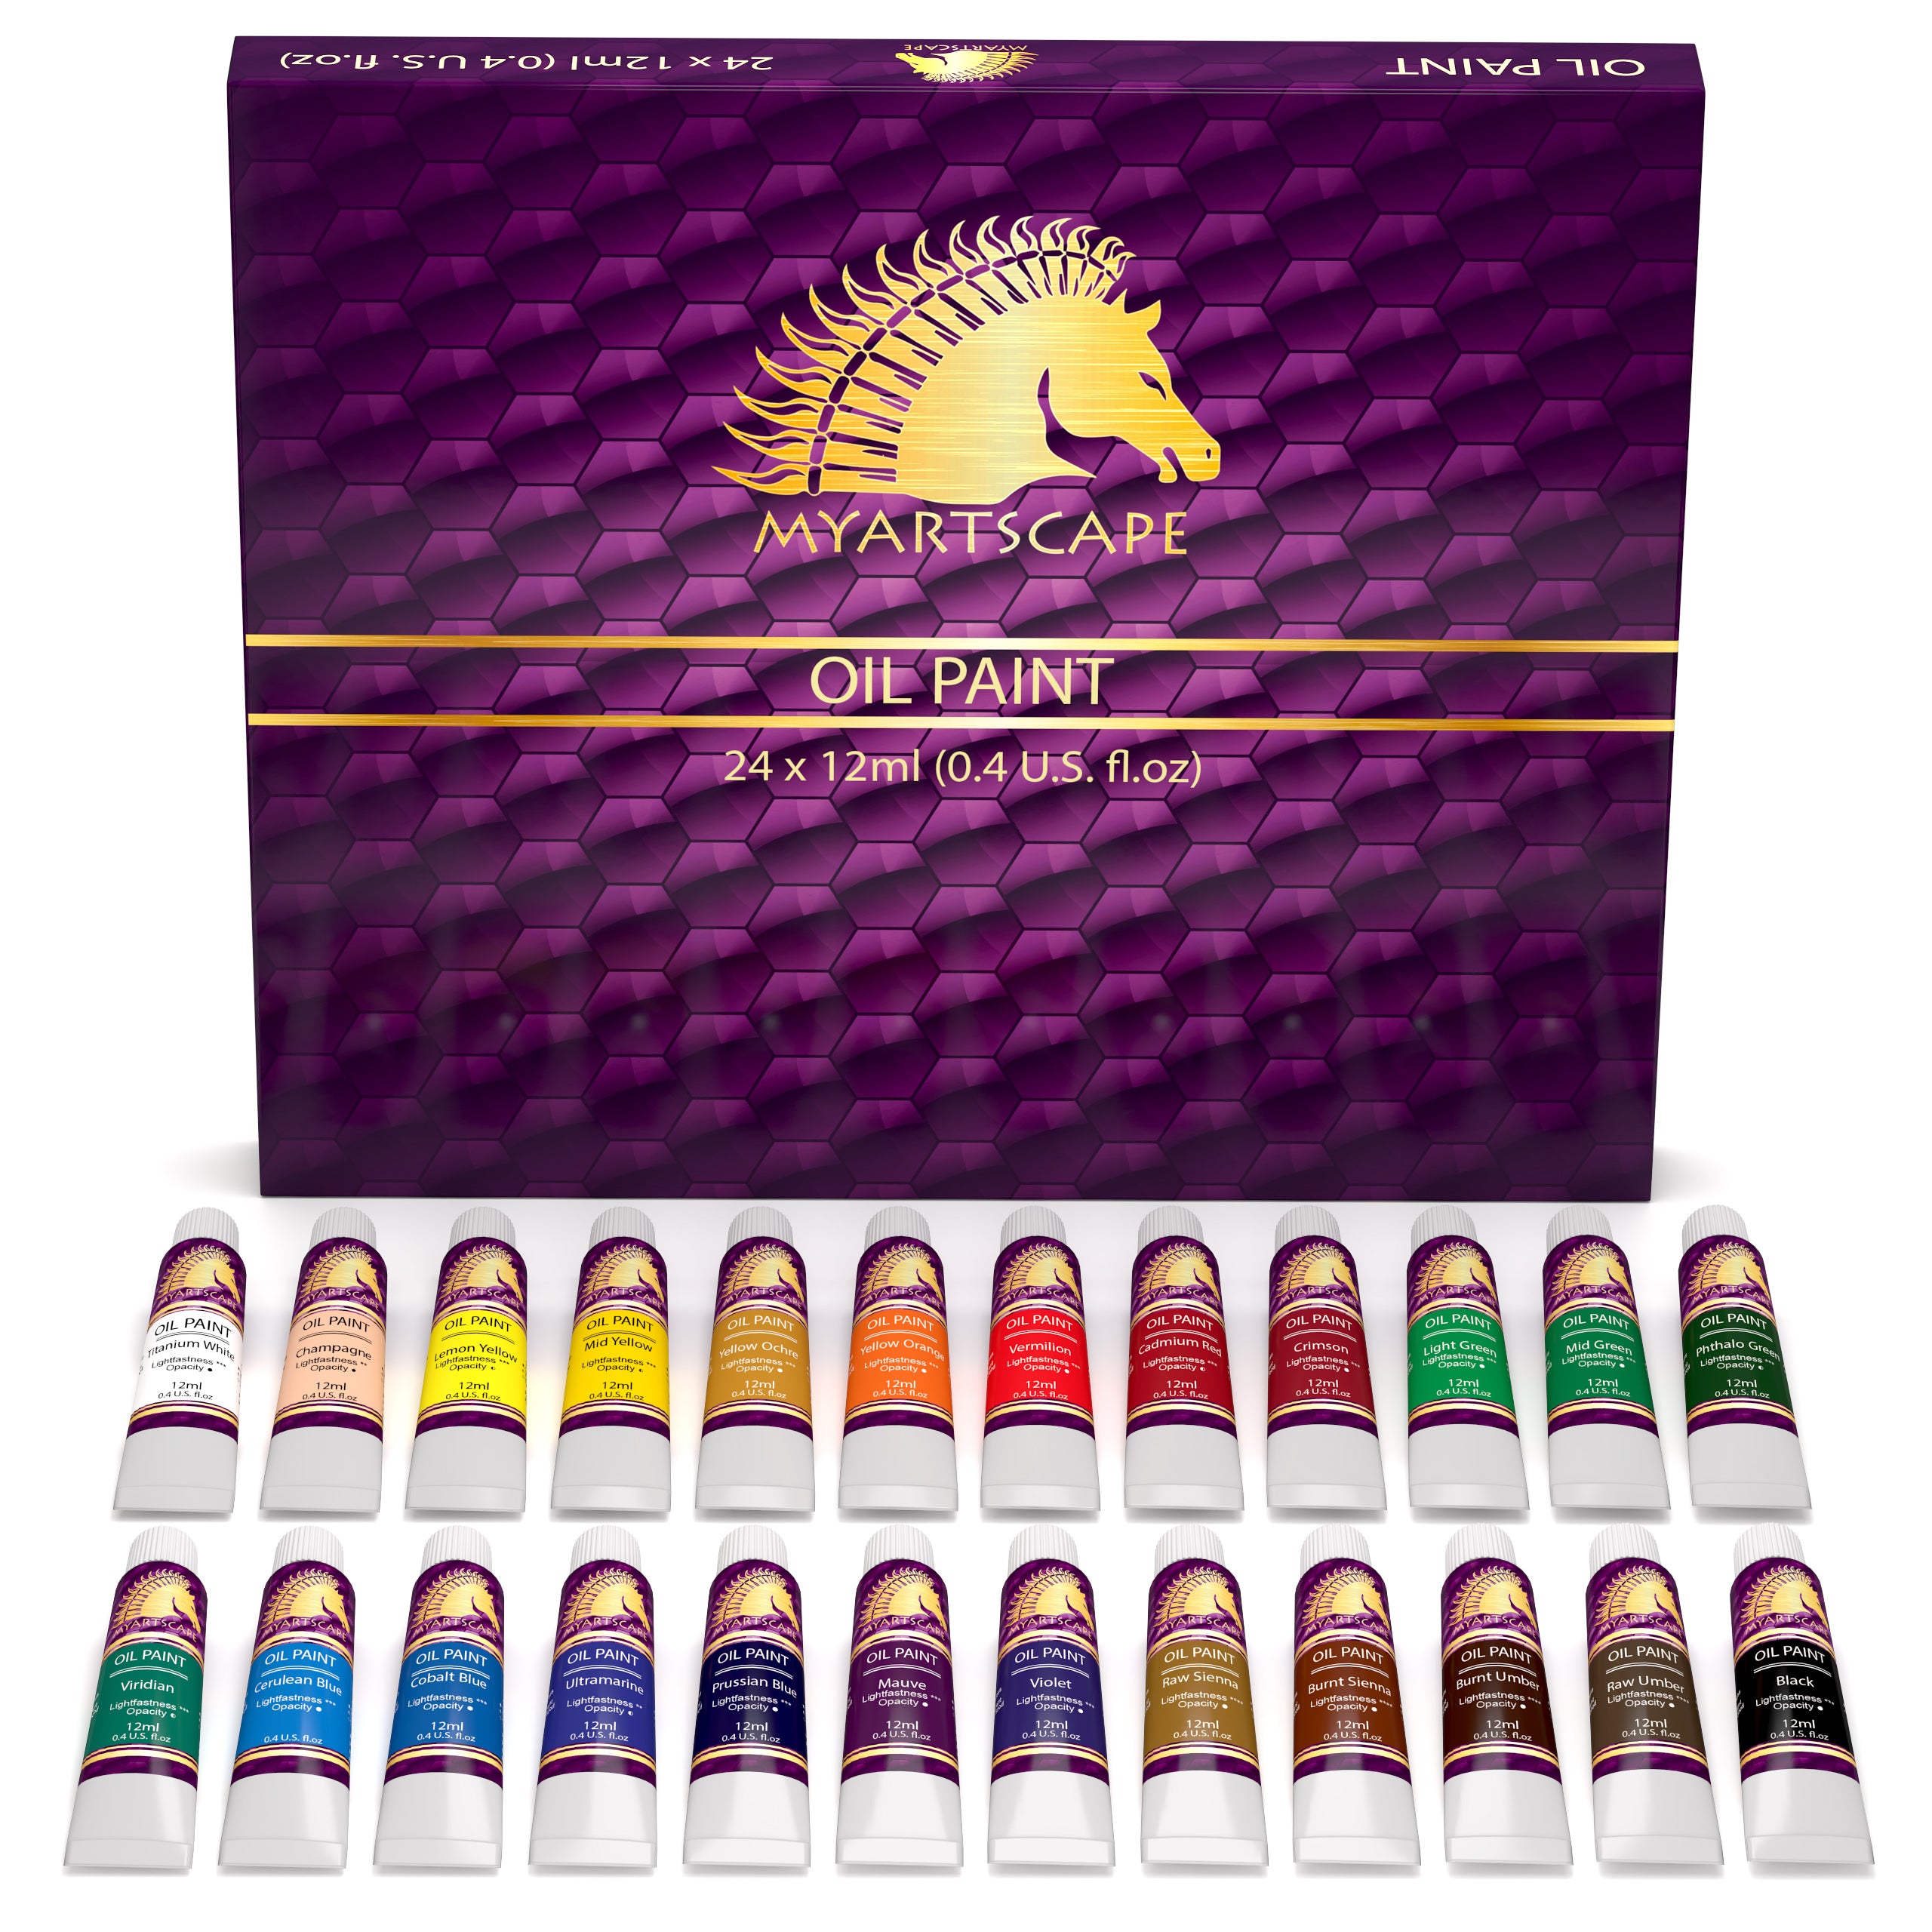 Buy ARTEZA Oil Paint Set, 24 Colors in 12ml/0.4 US fl oz Tubes, Richly  Pigmented Oil Painting Supplies for Canvas, Art Supplies for Beginners &  Professional Artists, Oil Painting Kit Online at